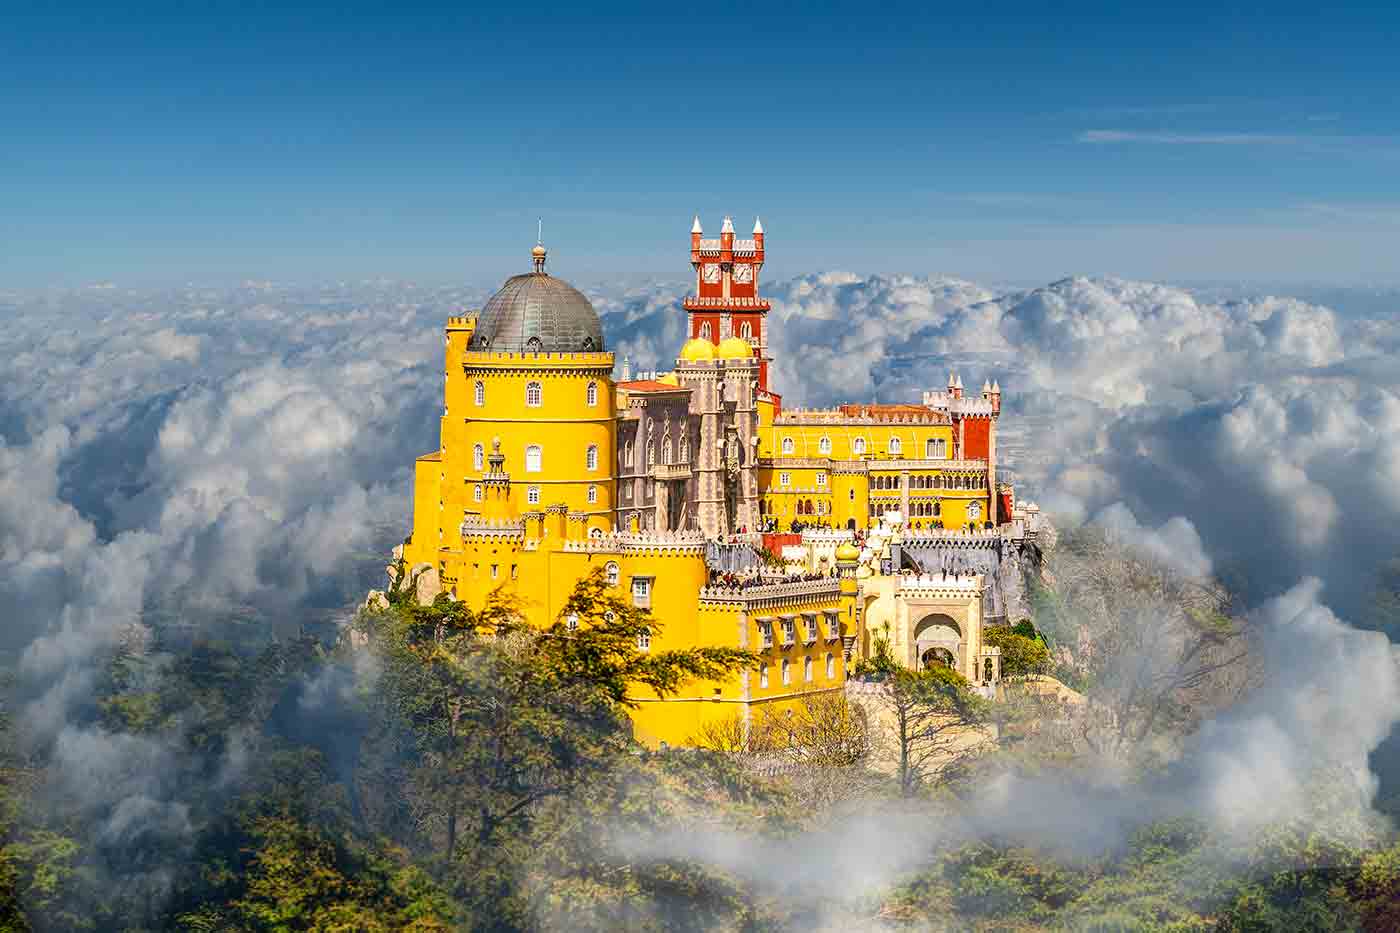 18 Tourist Places to Visit in Sintra, Portugal - Things to Do in Sintra